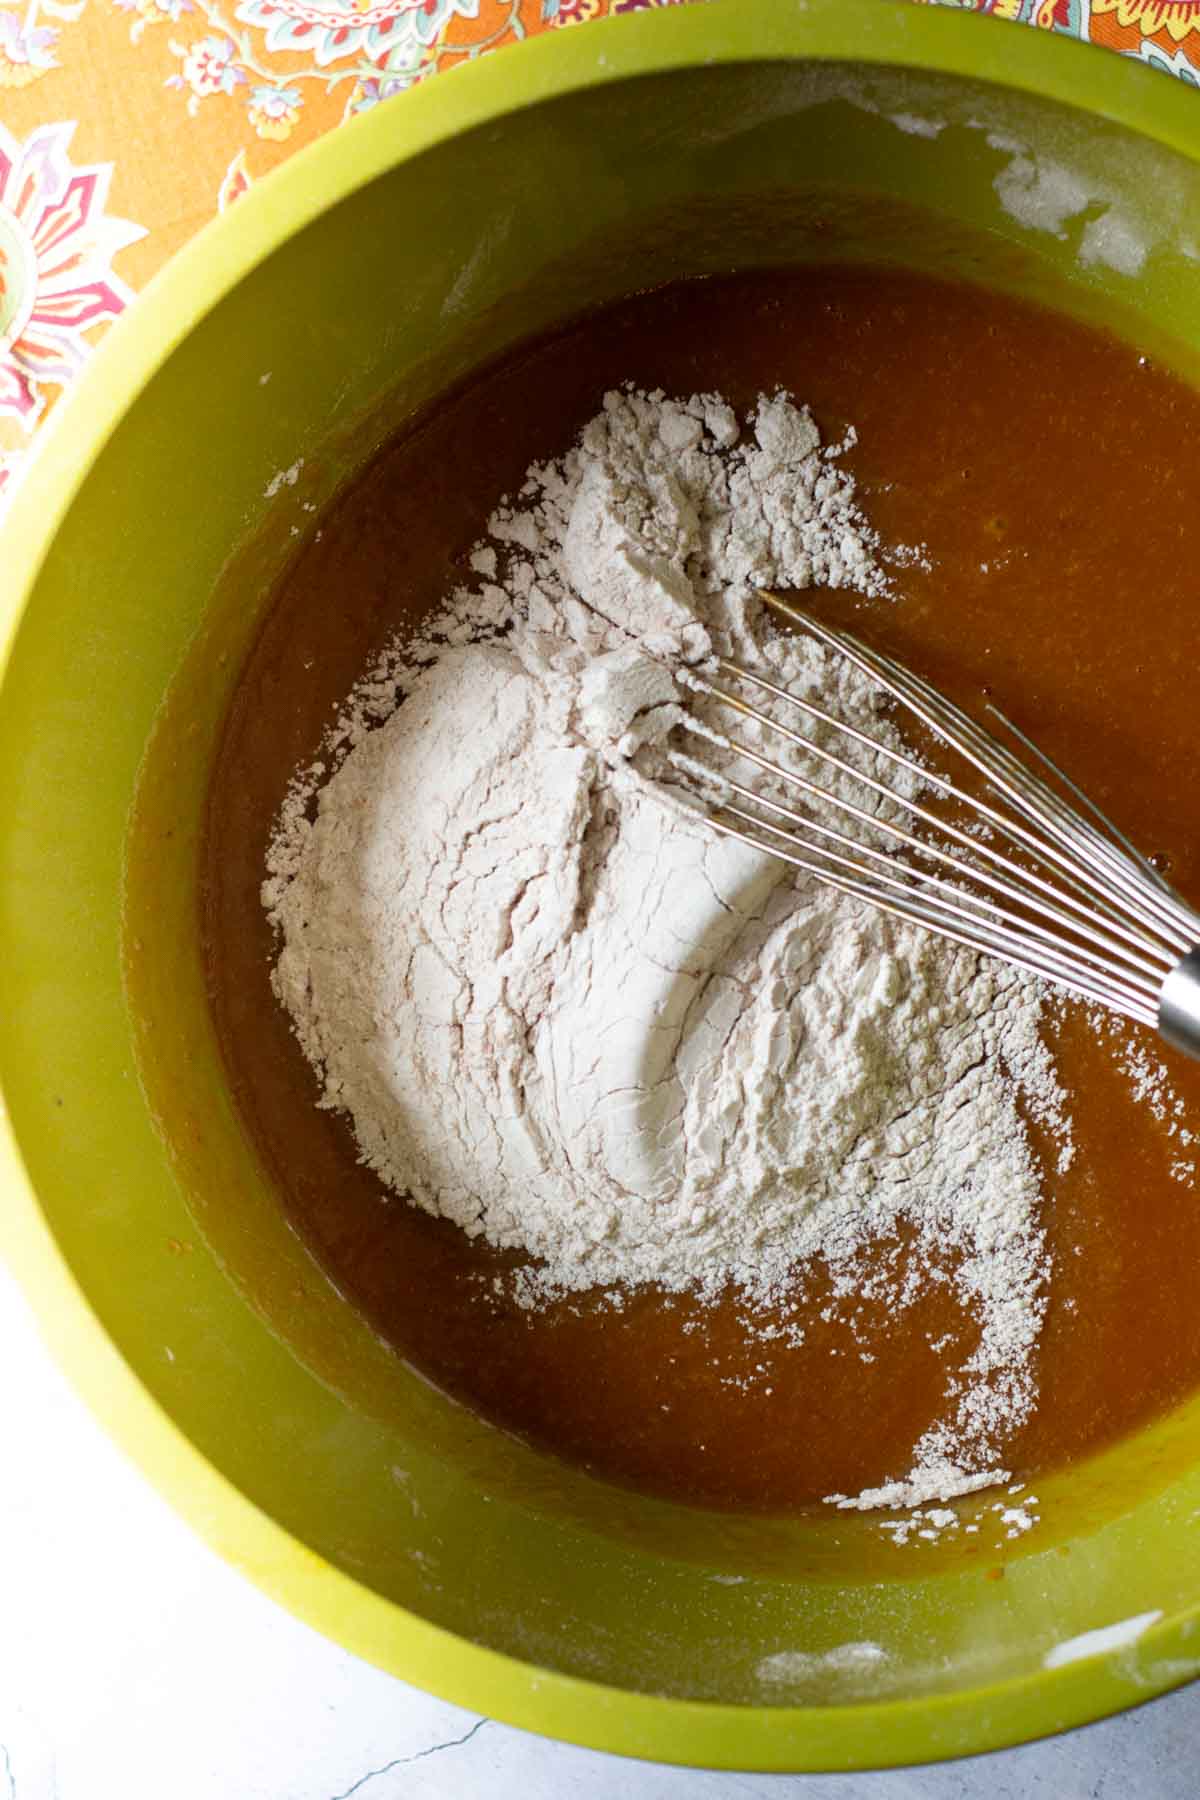 Mixing dry and wet ingredients together to make pumpkin bread.